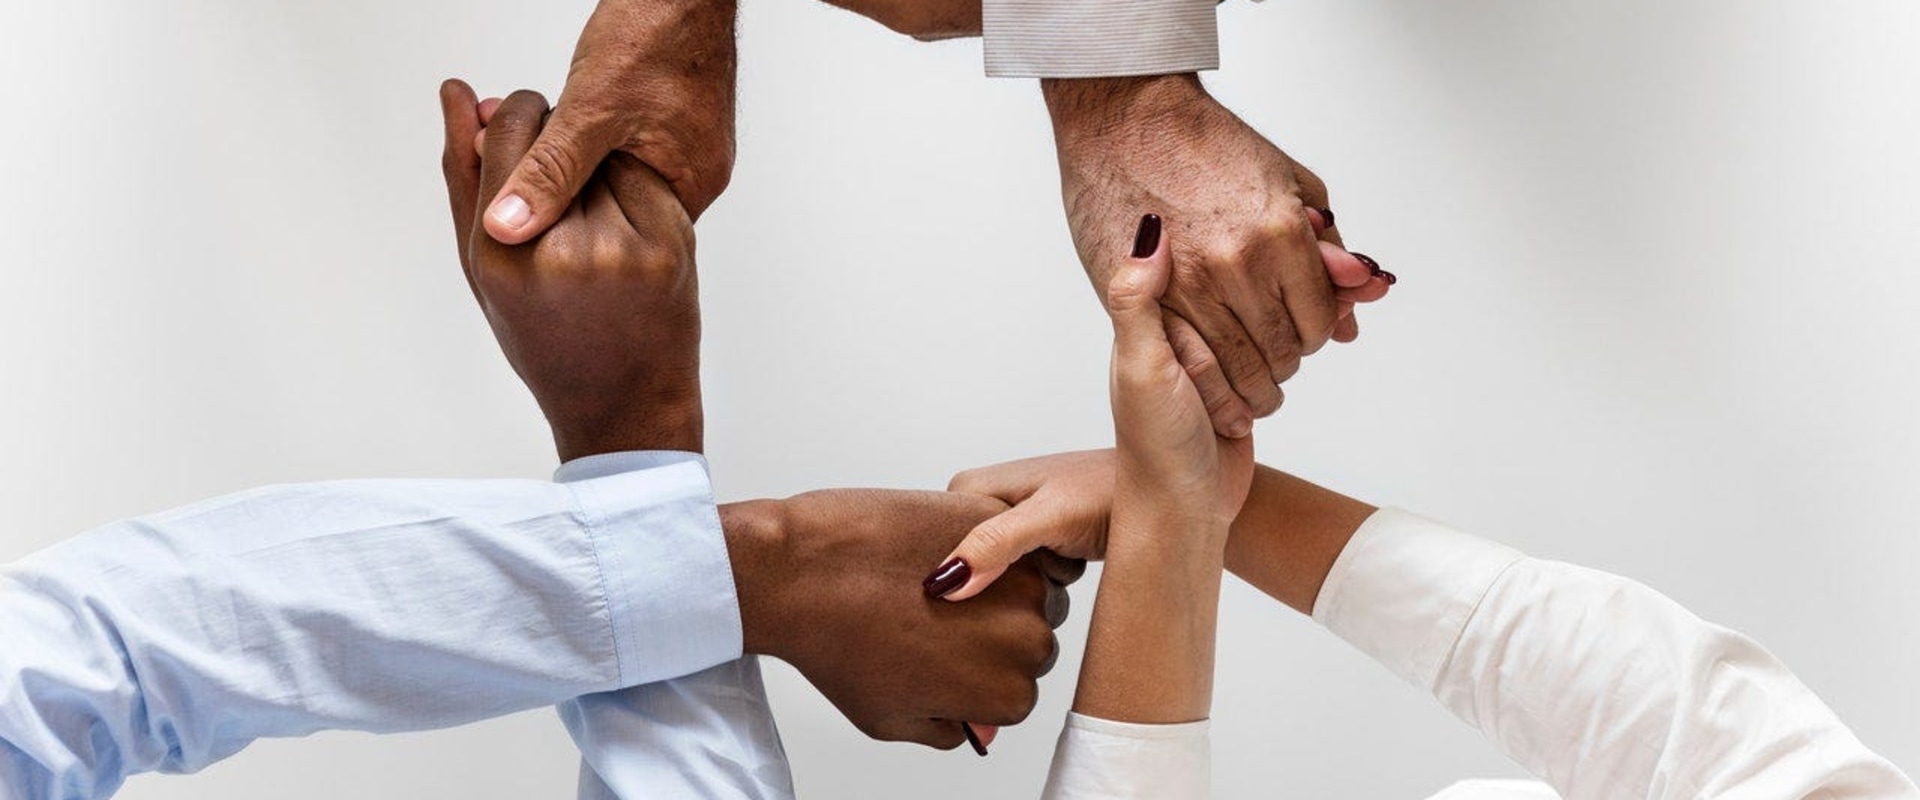 Building Trust Among Team Members: How to Foster Strong Relationships